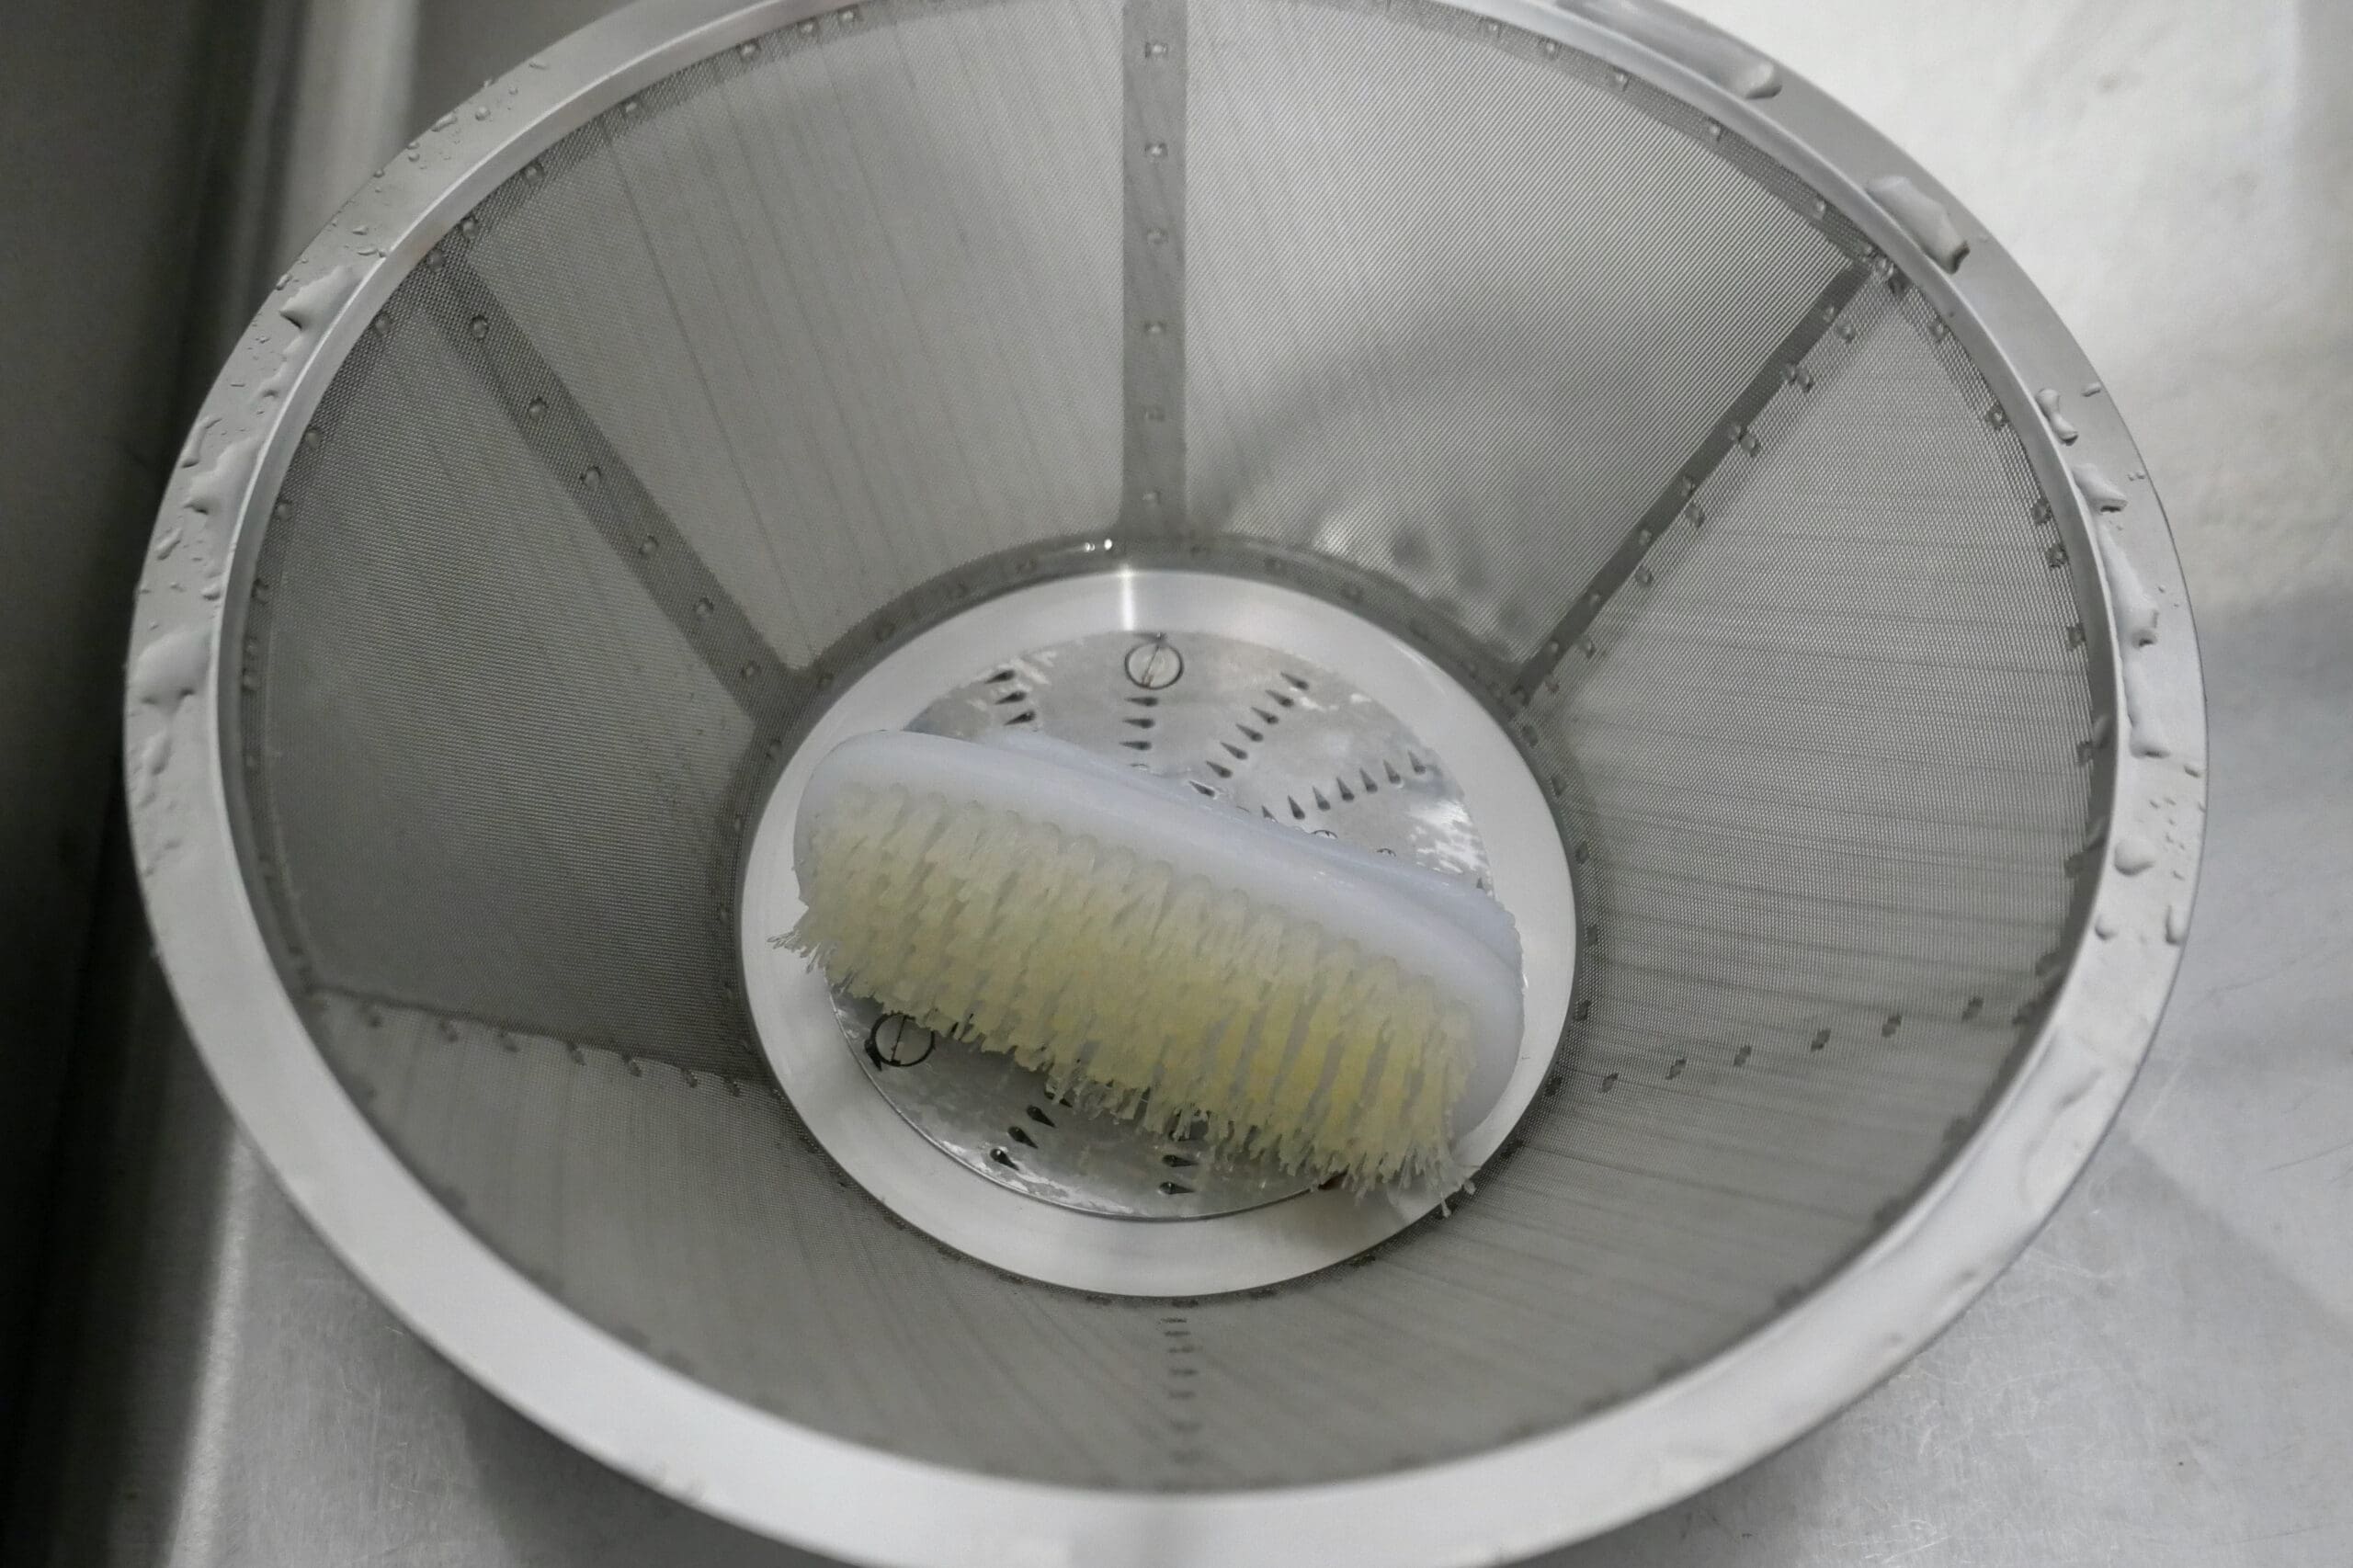 Centrifugal juicer screen with brush